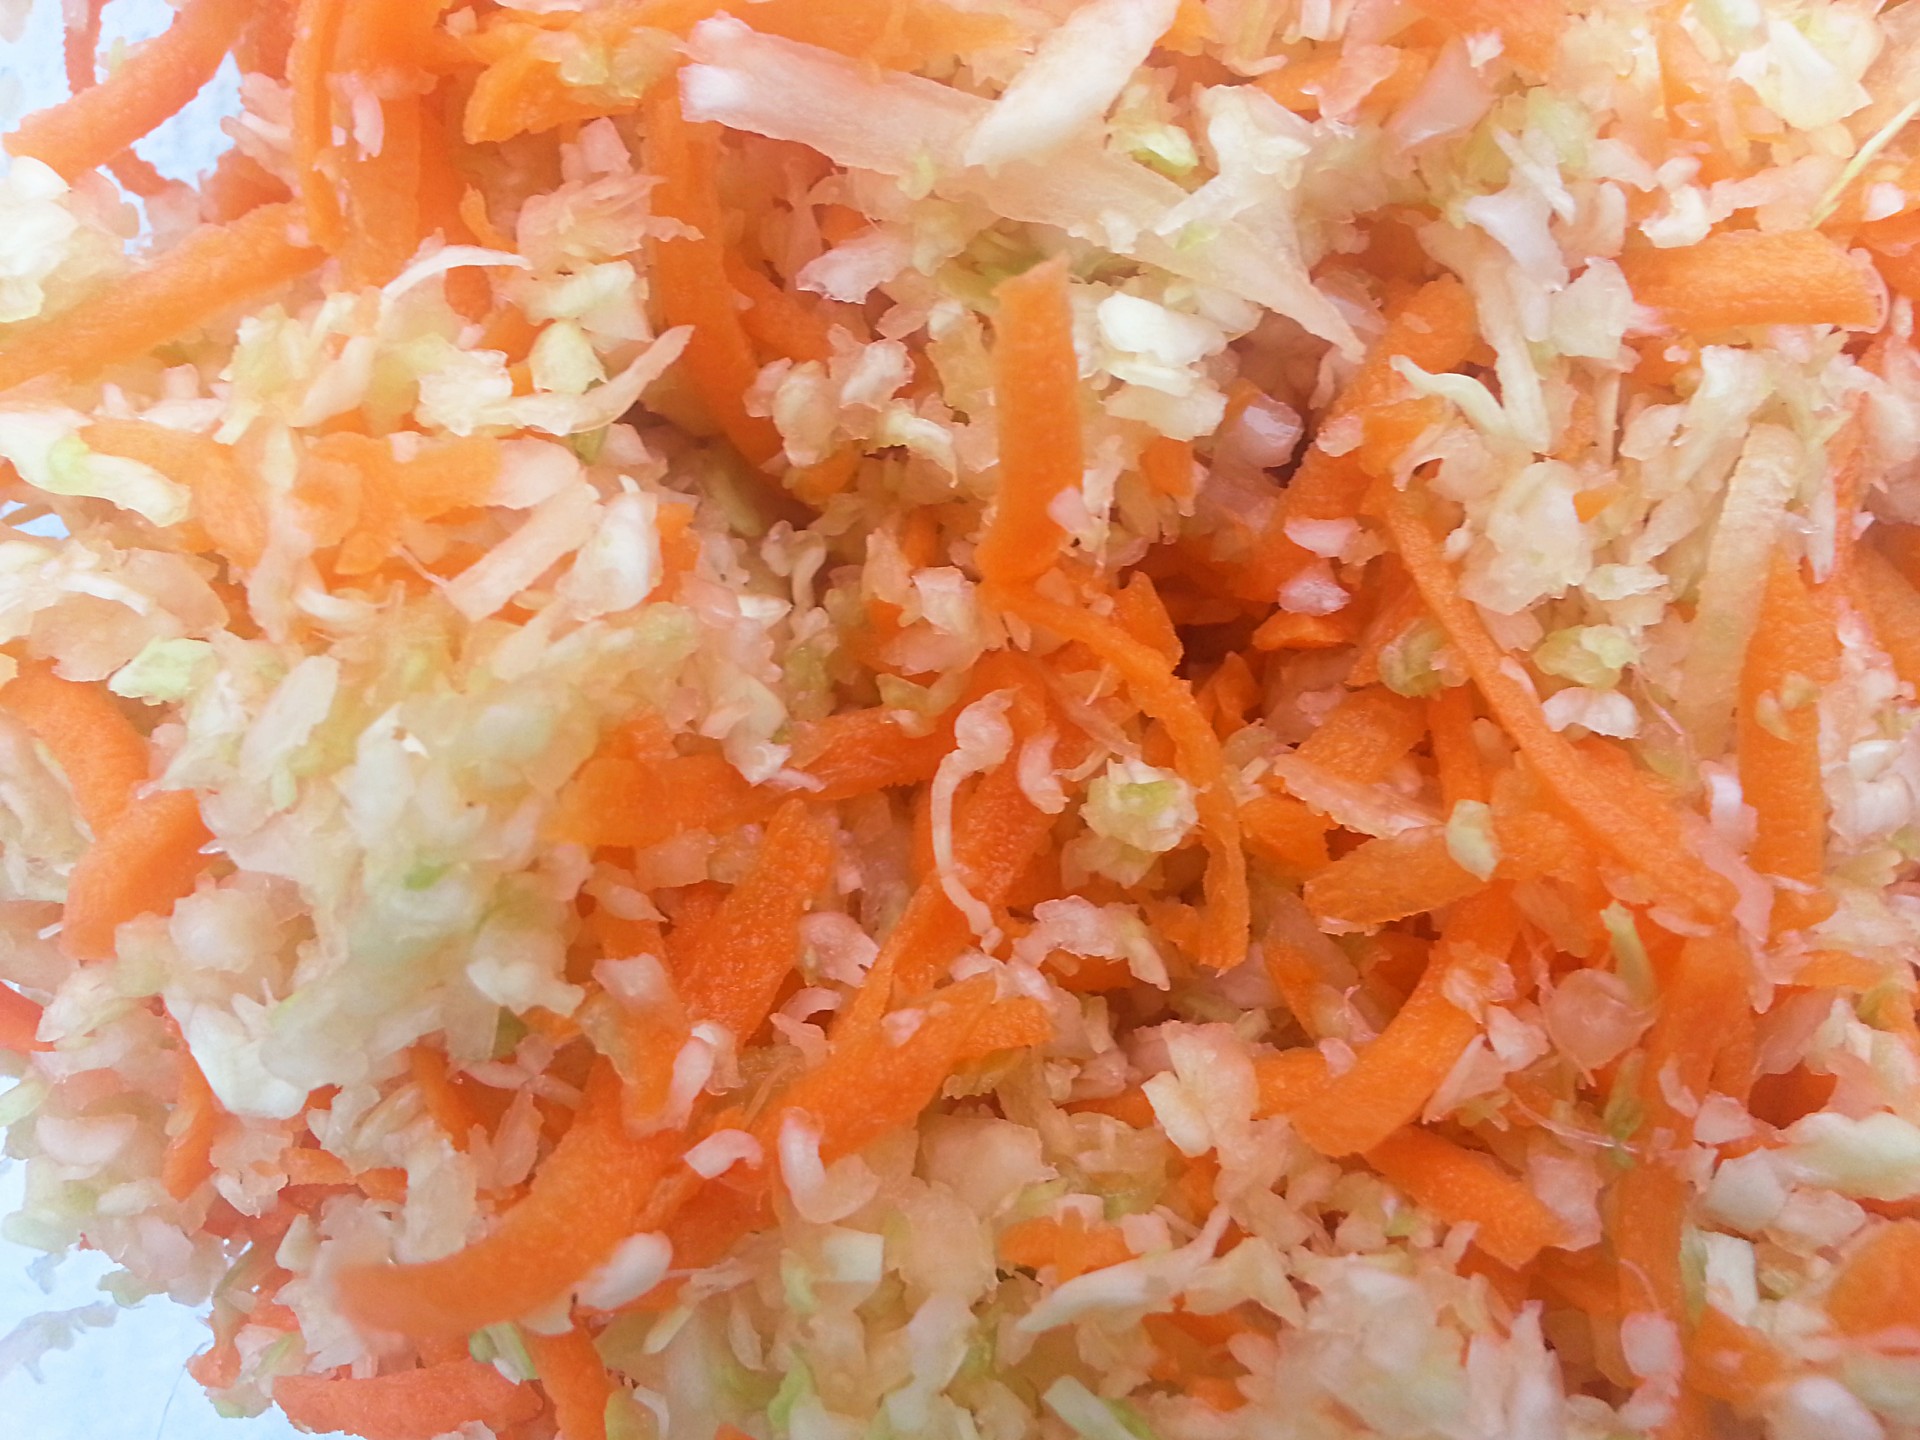 Our Coleslaw